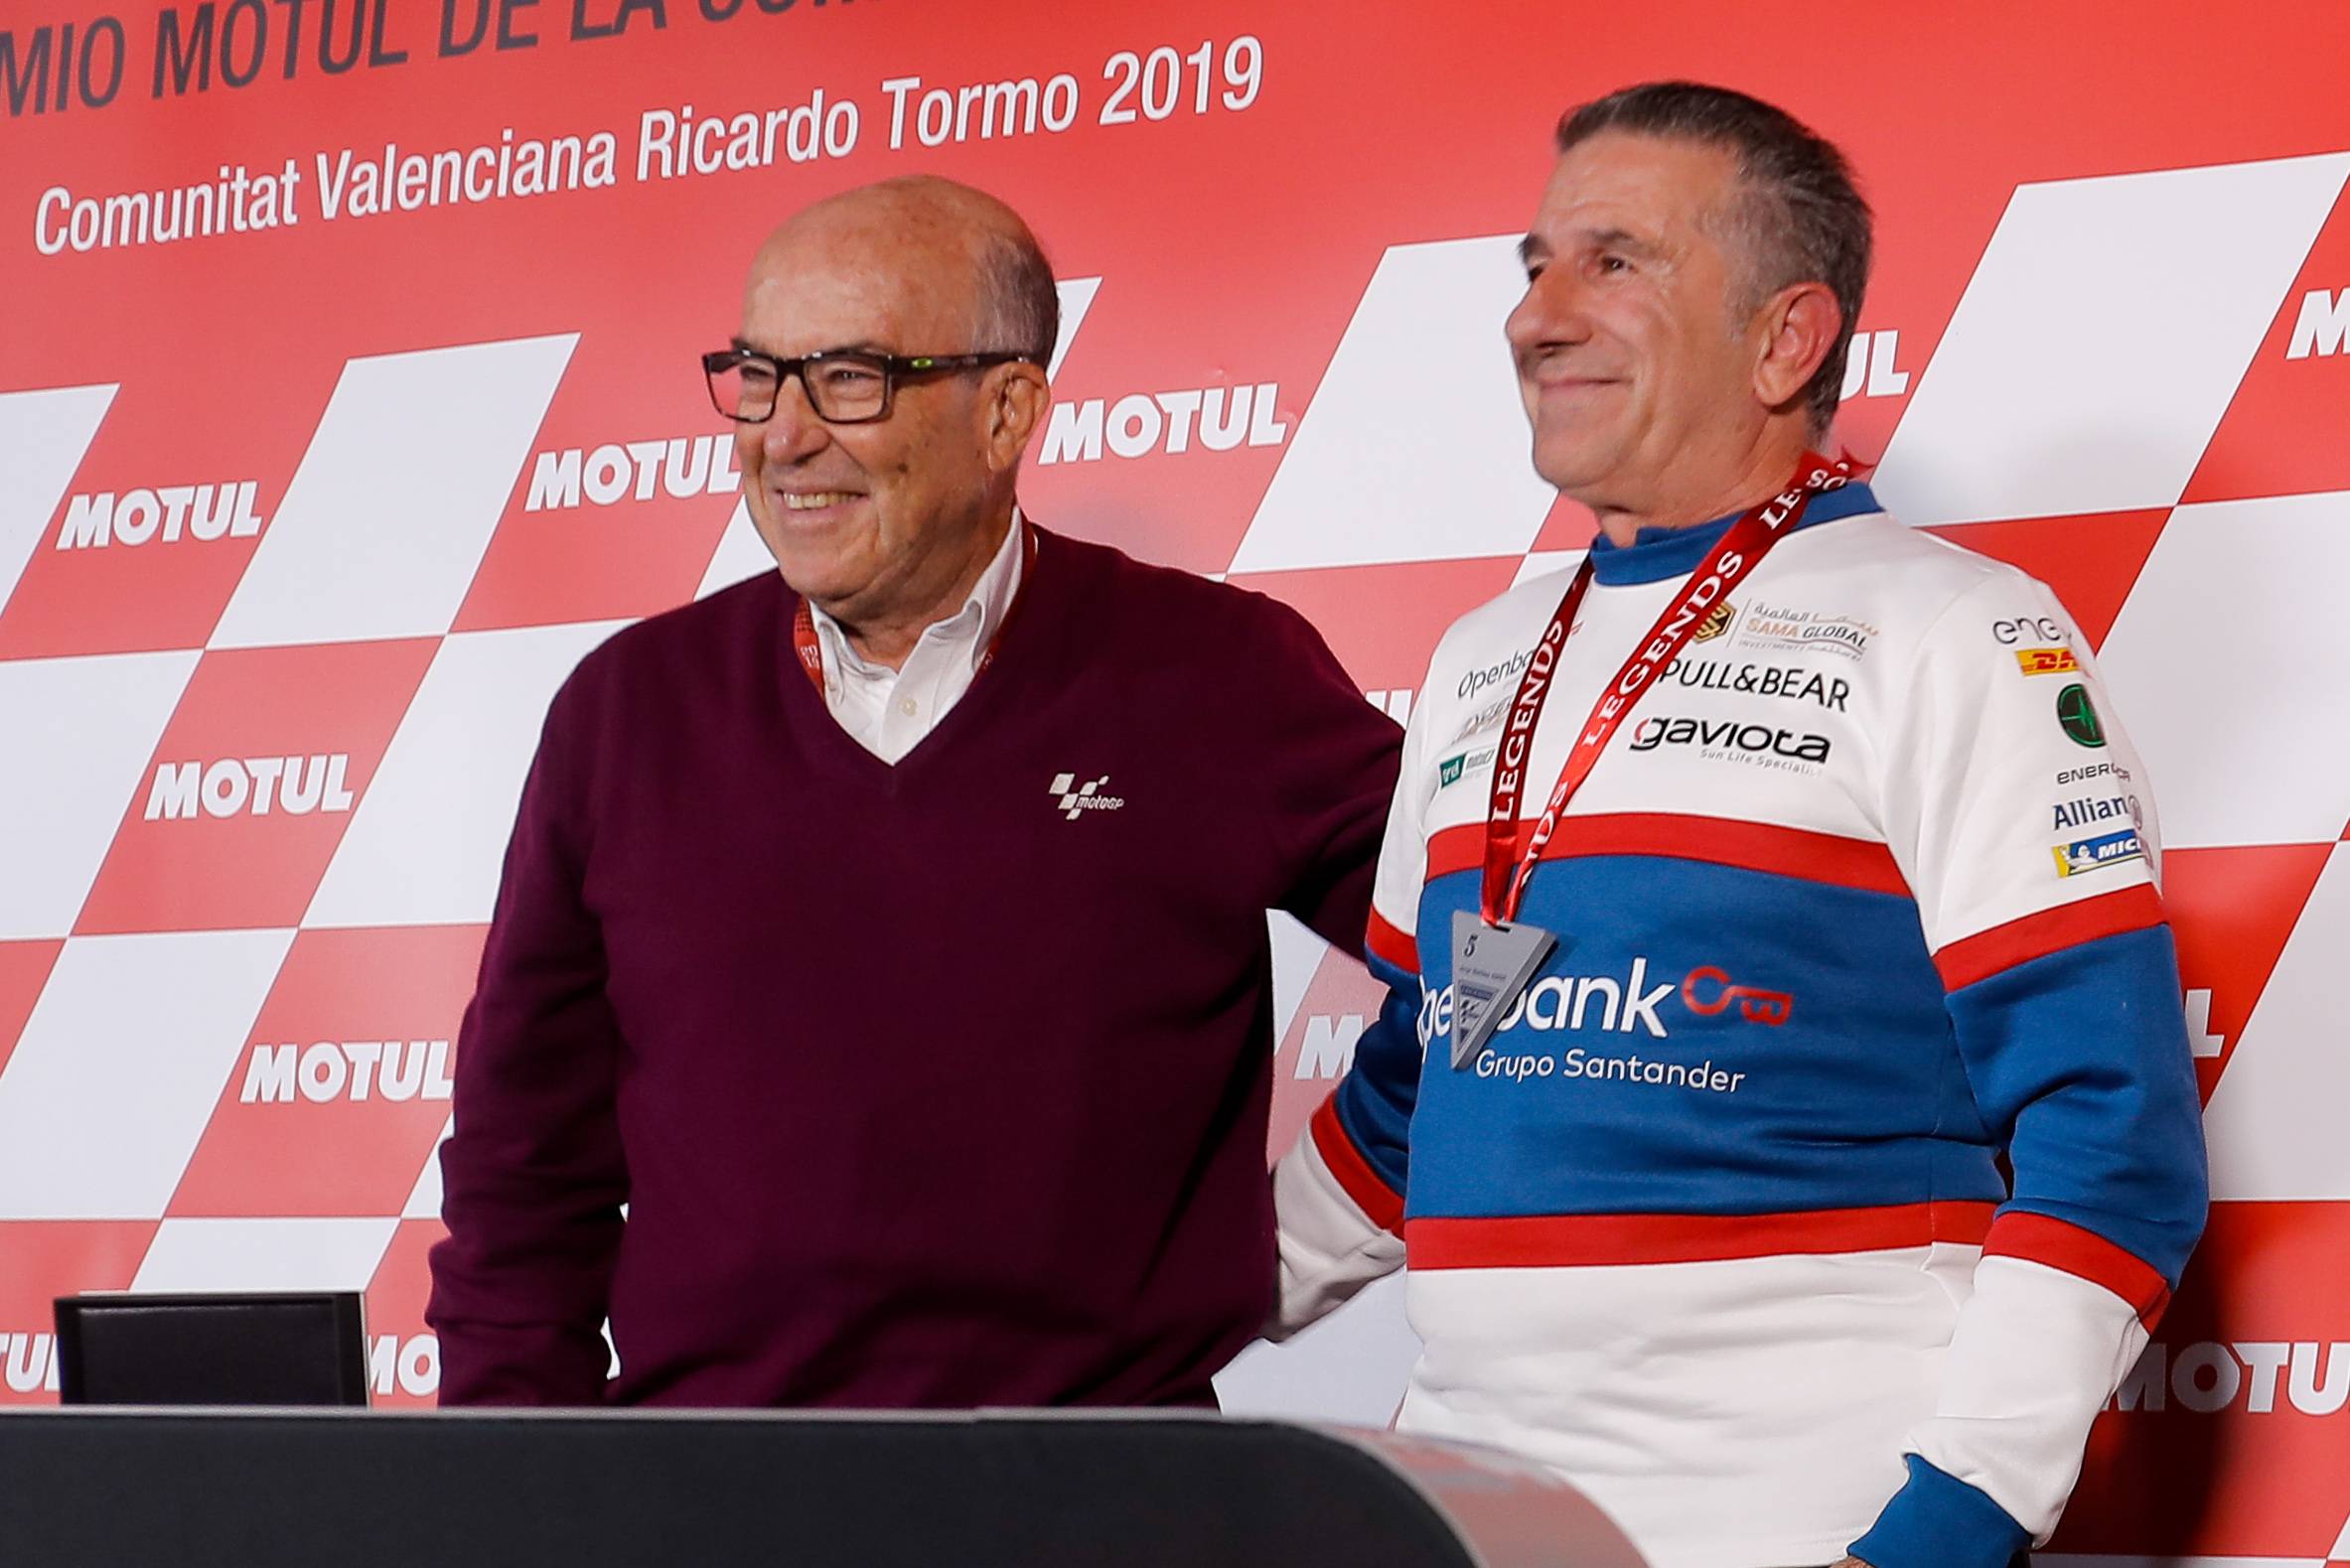 Four-time World Champion Jorge Martínez “Aspar” joins a select group of riders in the history of Grand Prix racing, including the likes of Ángel Nieto and Giacomo Agostini, as a MotoGP Legend.